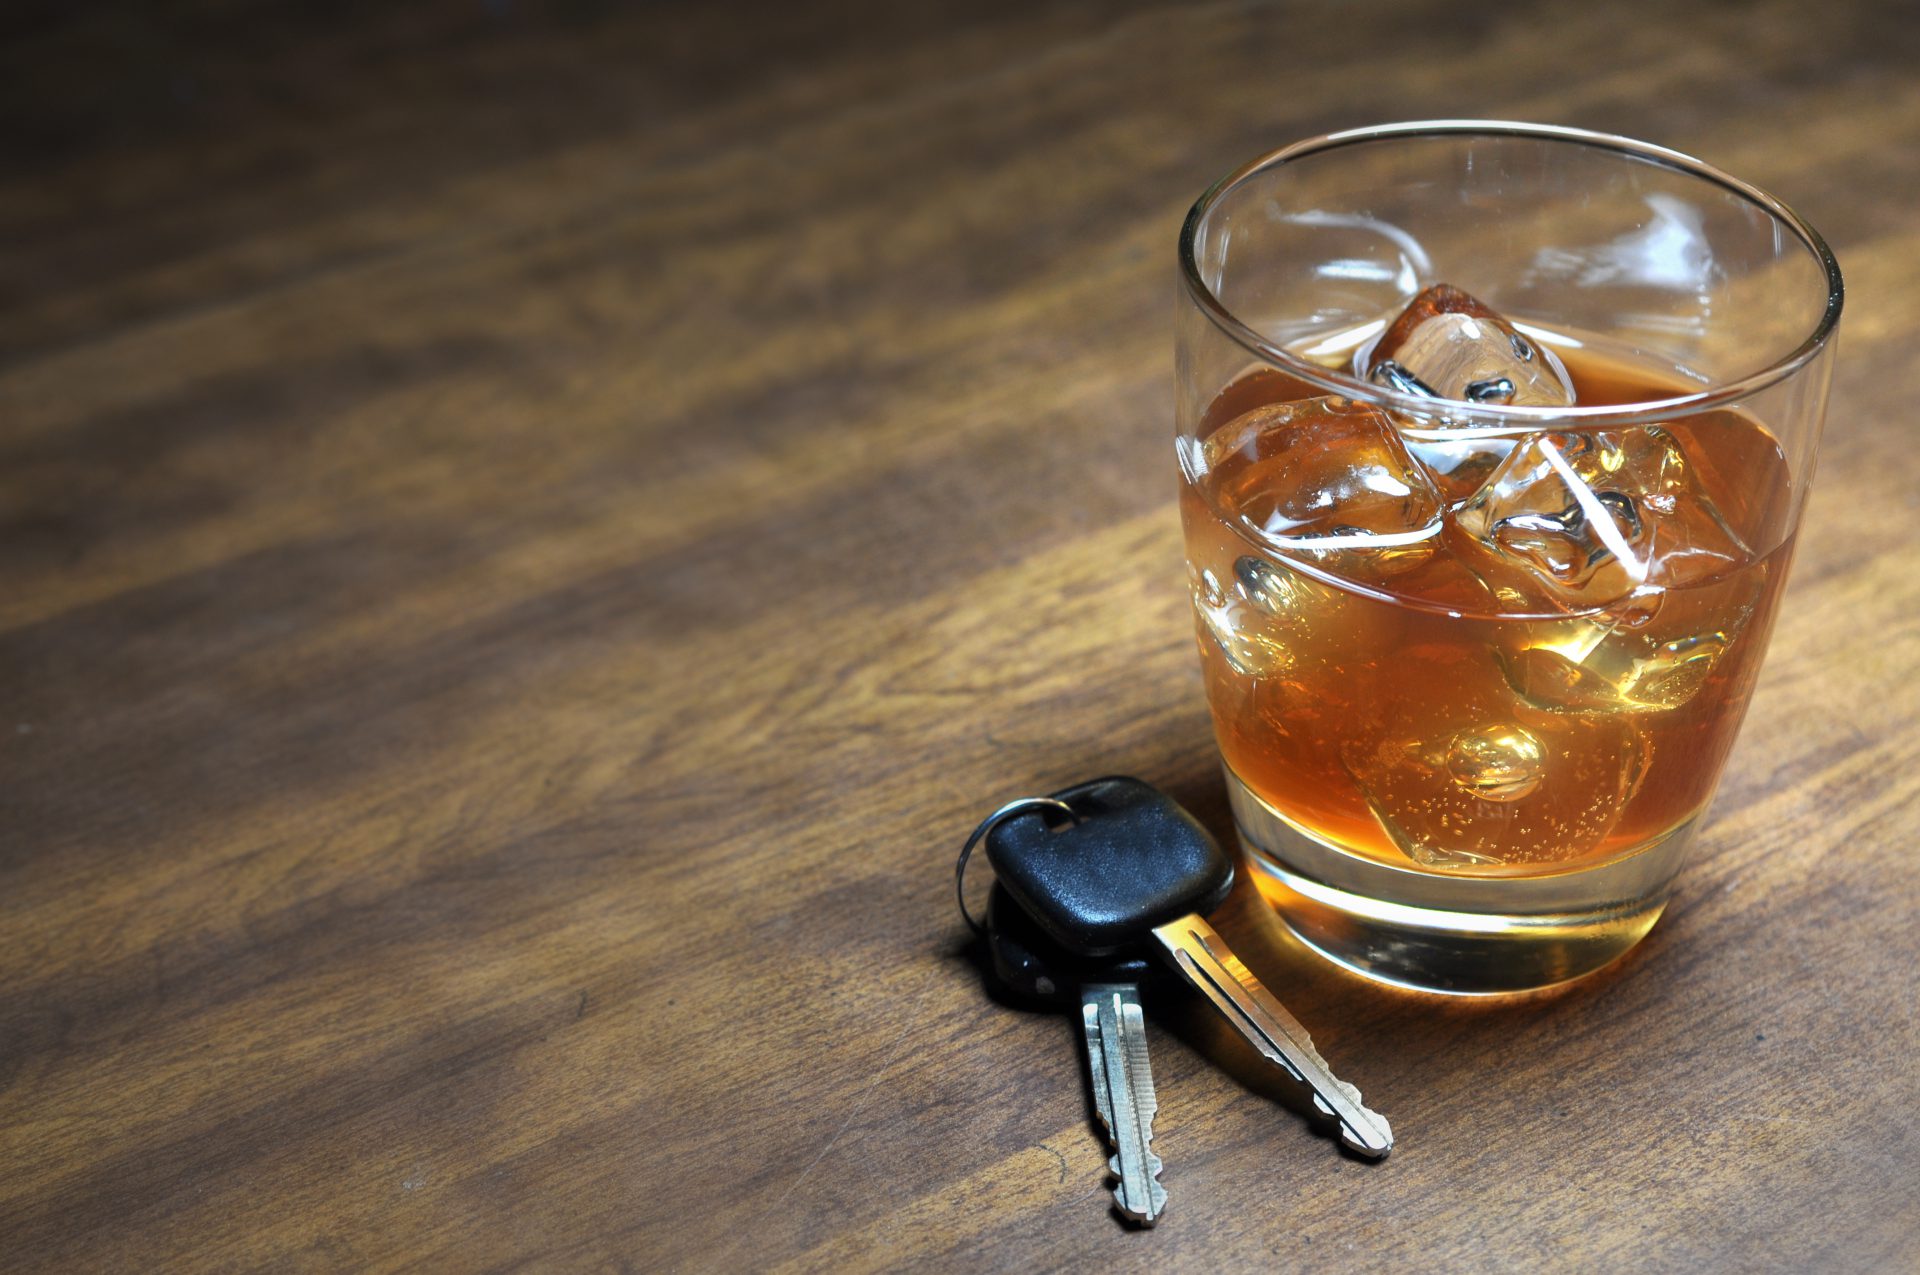 Designated driving services deal with busy NYE